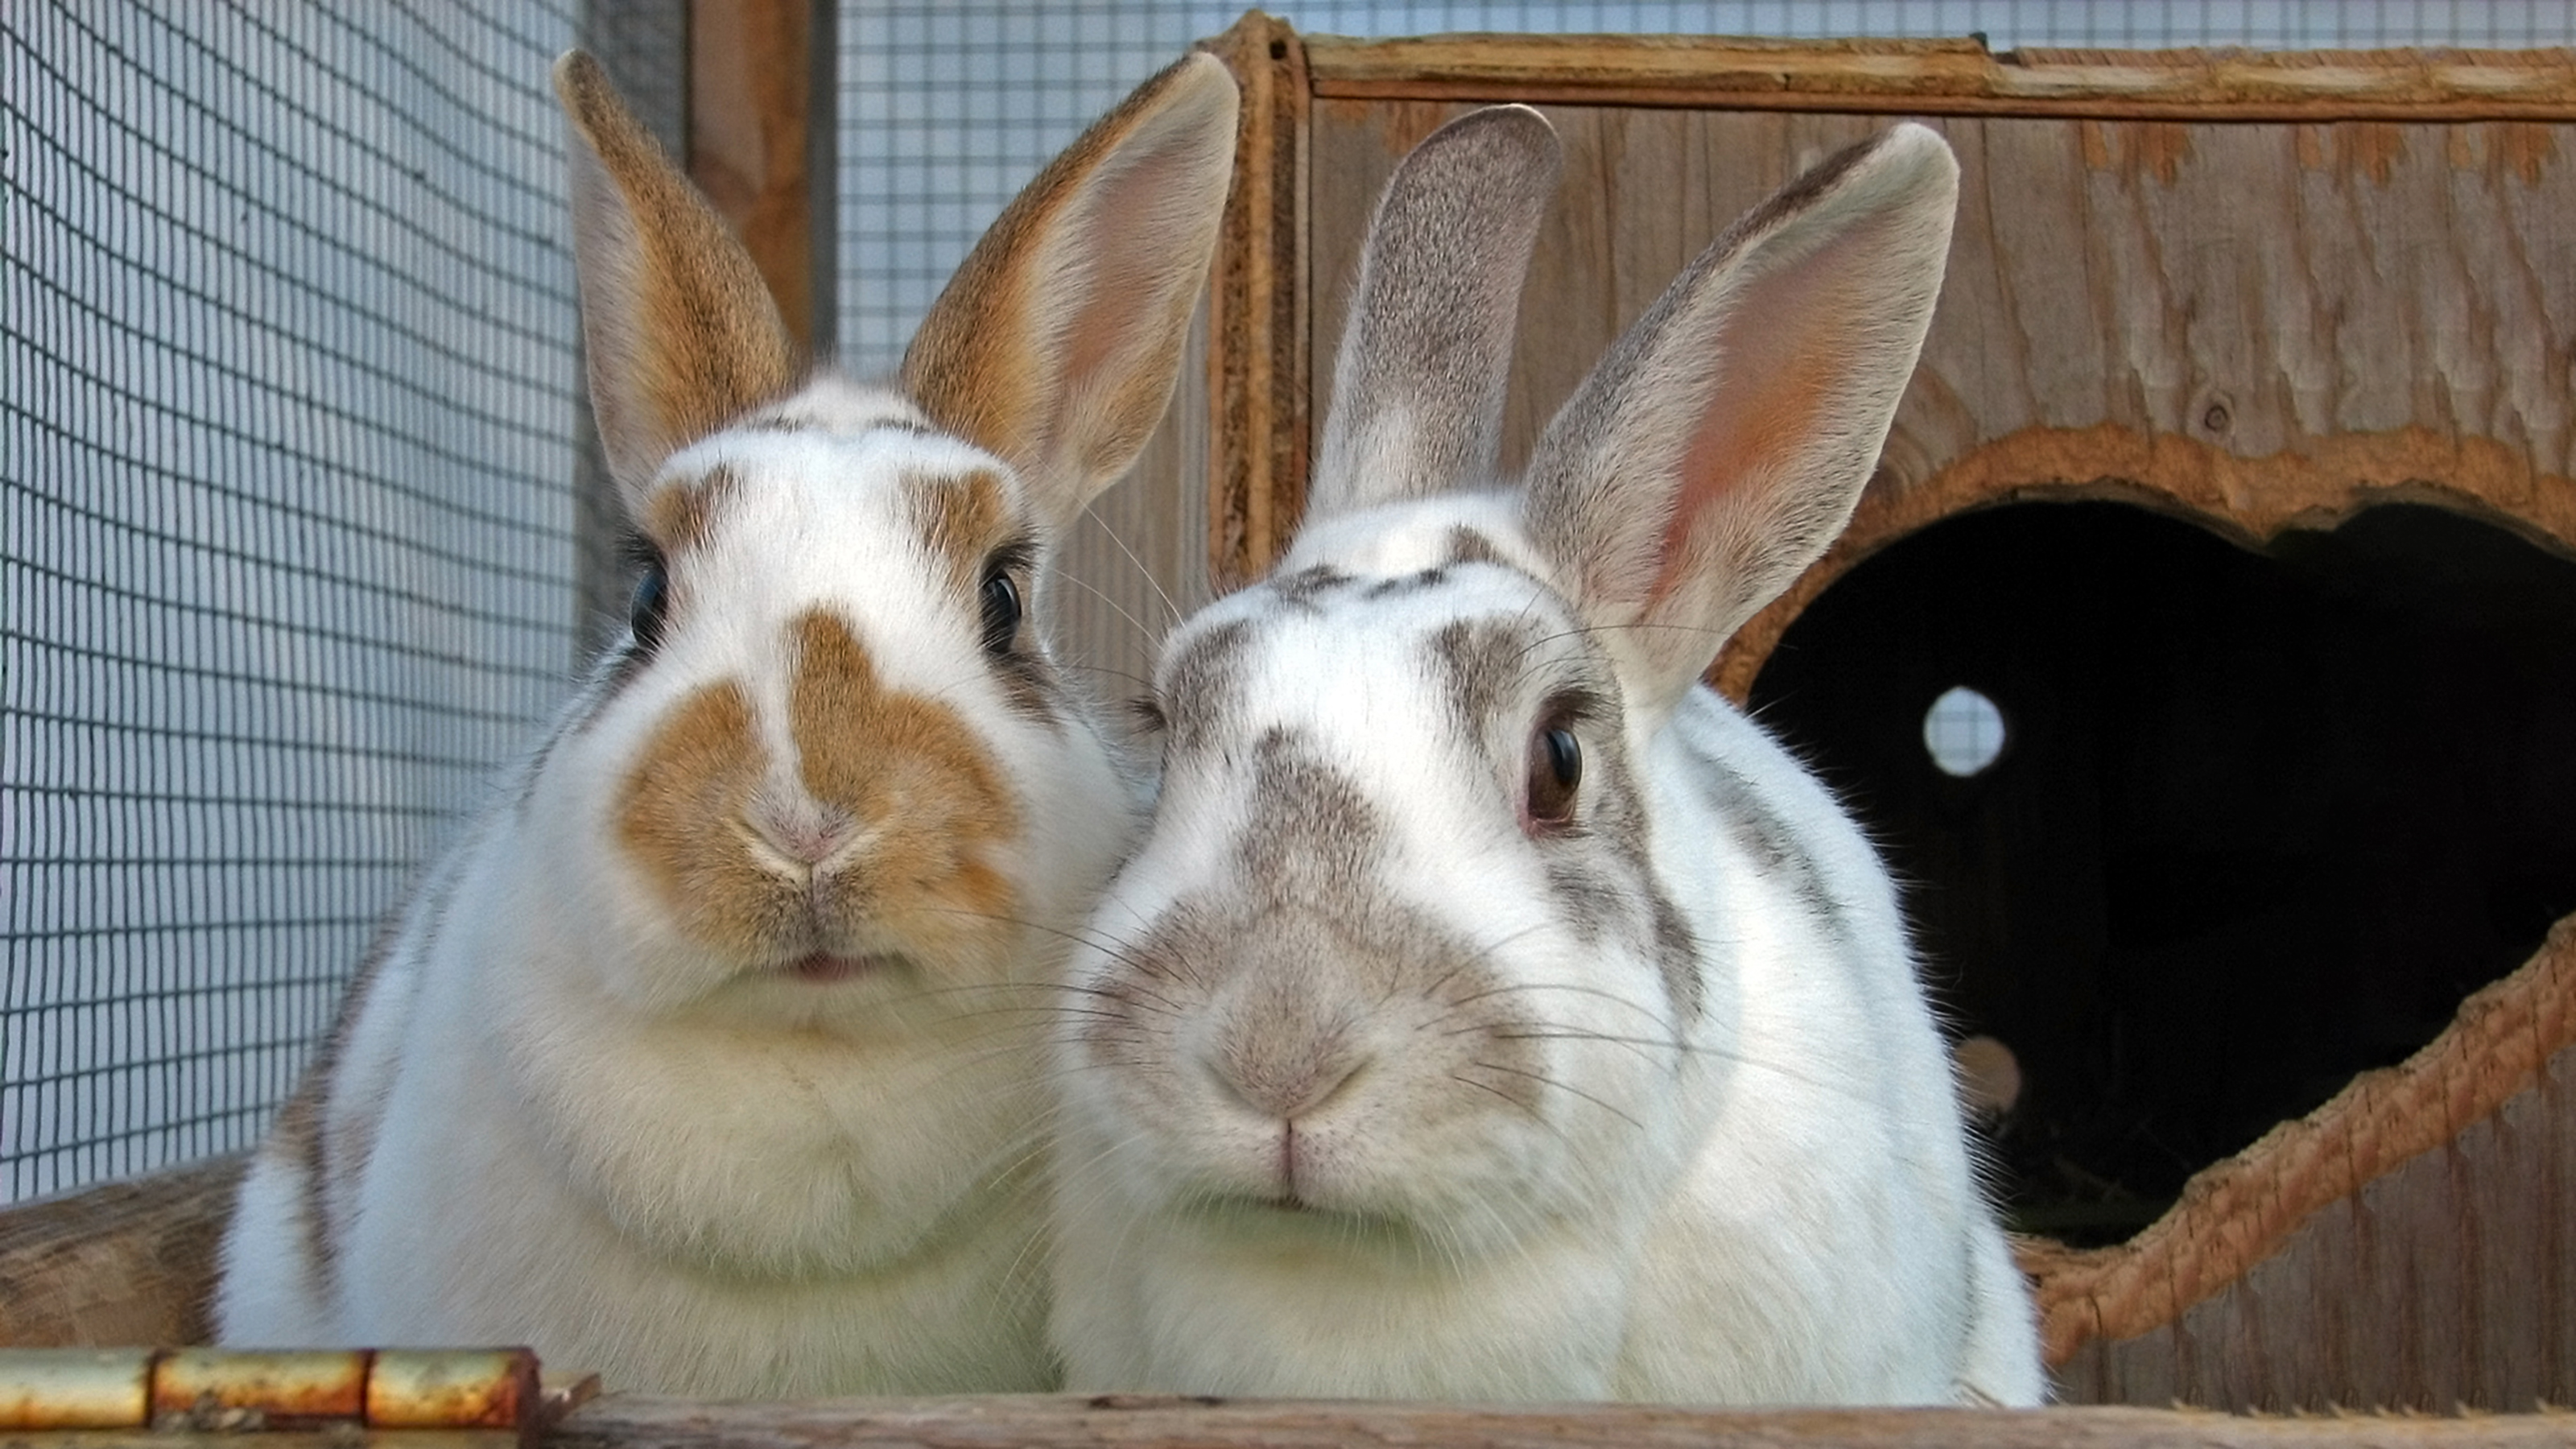 How To Clean A Rabbit's Ears, Rabbit Hygiene, Rabbits, Guide